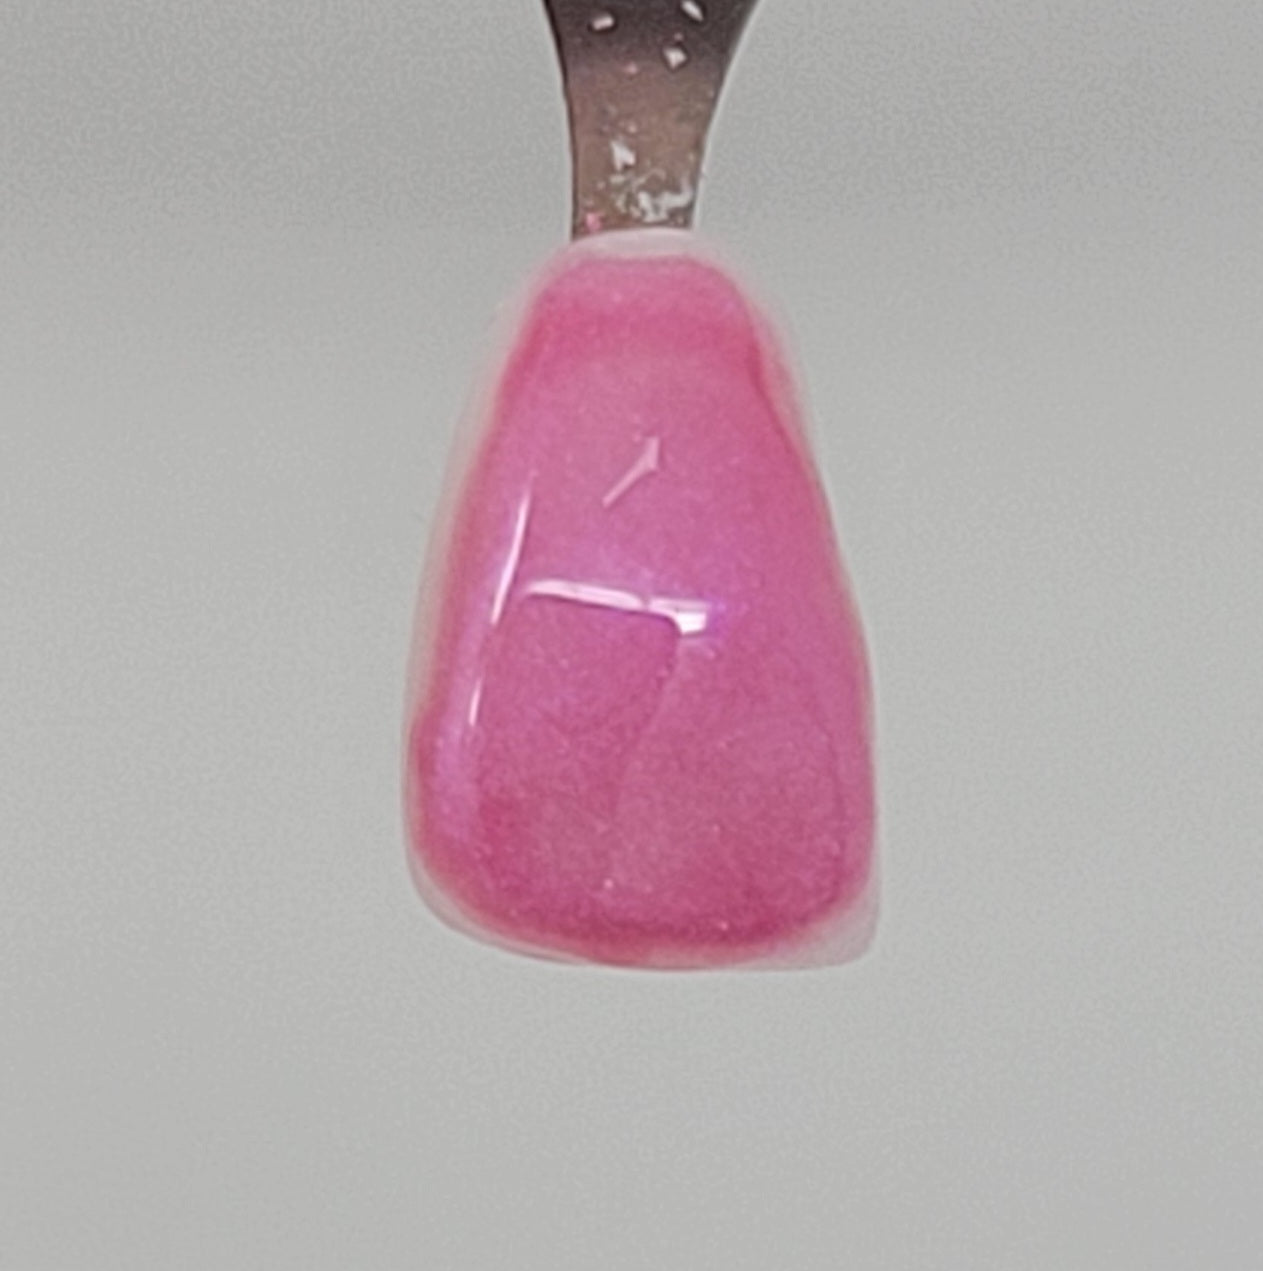 Bubble Gum Pink Temporary Tattooth Colorant on a demo tooth.  These colorants can be applied to teeth to temporarily alter their color or iridescence.